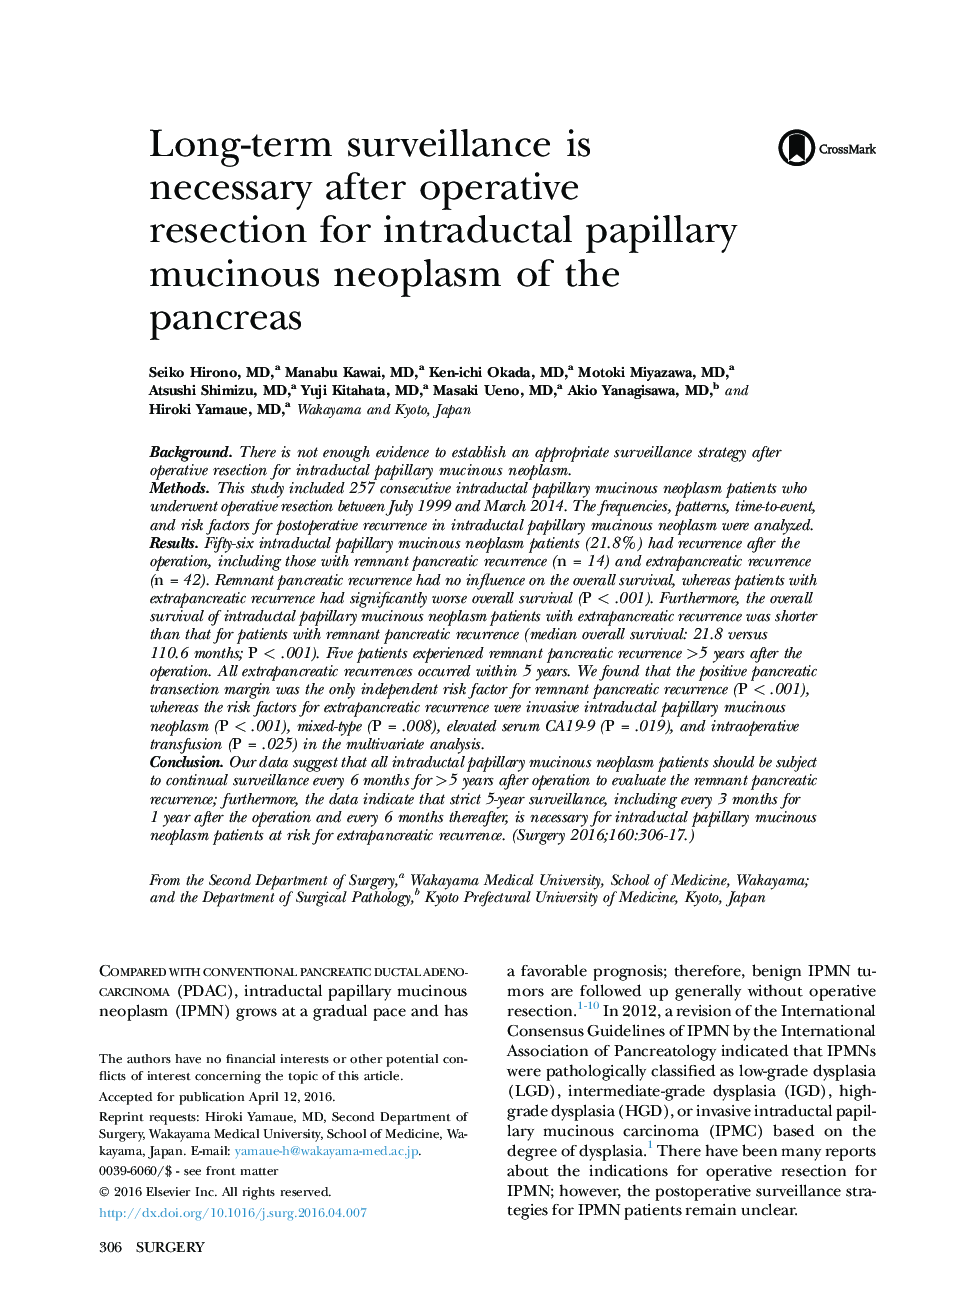 PancreasLong-term surveillance is necessary after operative resection for intraductal papillary mucinous neoplasm of the pancreas